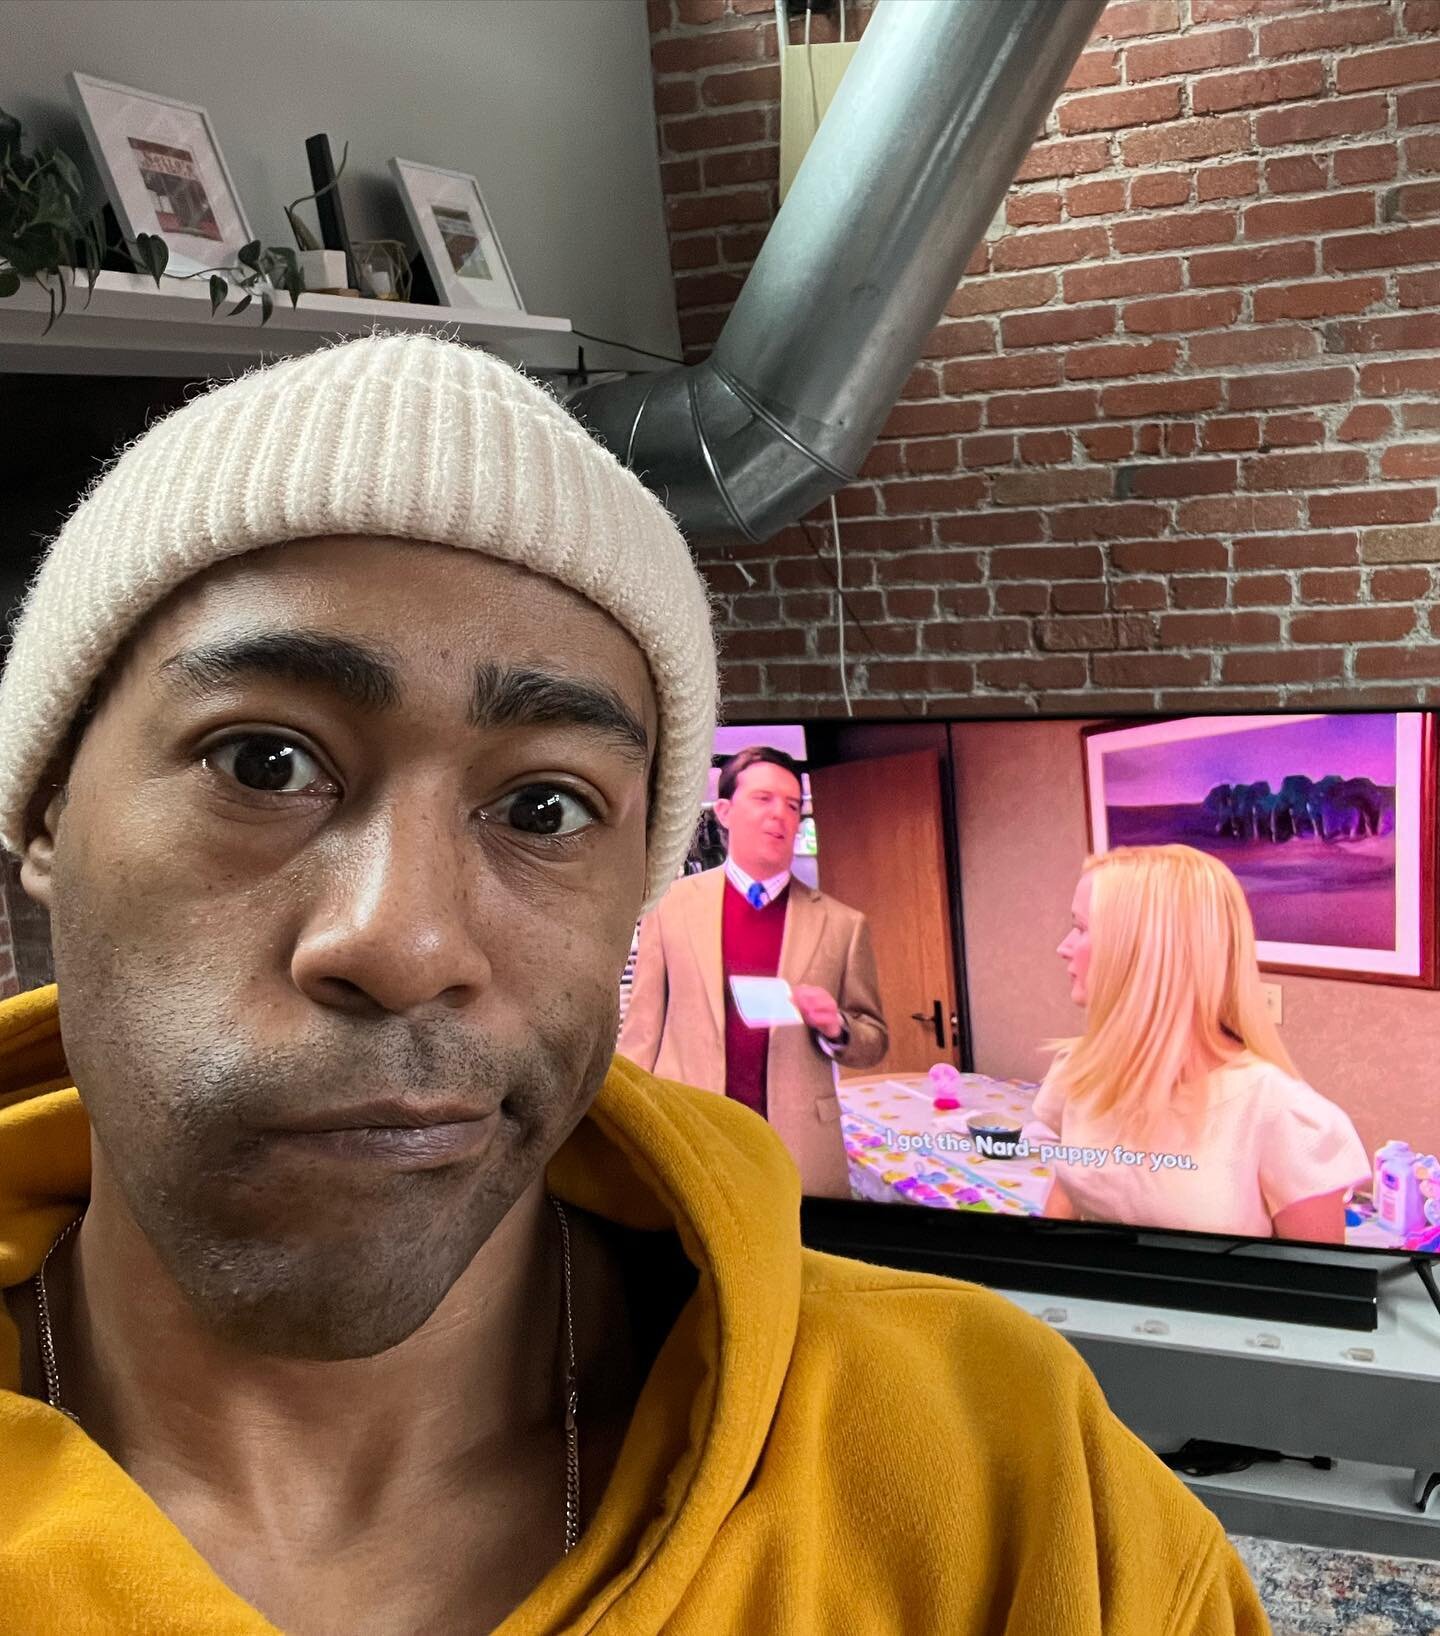 Who&rsquo;s still watching @theoffice in 2023 as their go to background noise show 😂😅😂
.
Yeah I know I look rough, chill. 
.
#onedayillquit #addicted  #theoffice #office #hat #imlivinb #brickbuffalo #jim #dwight #creed #oscar #stankley #workfromho